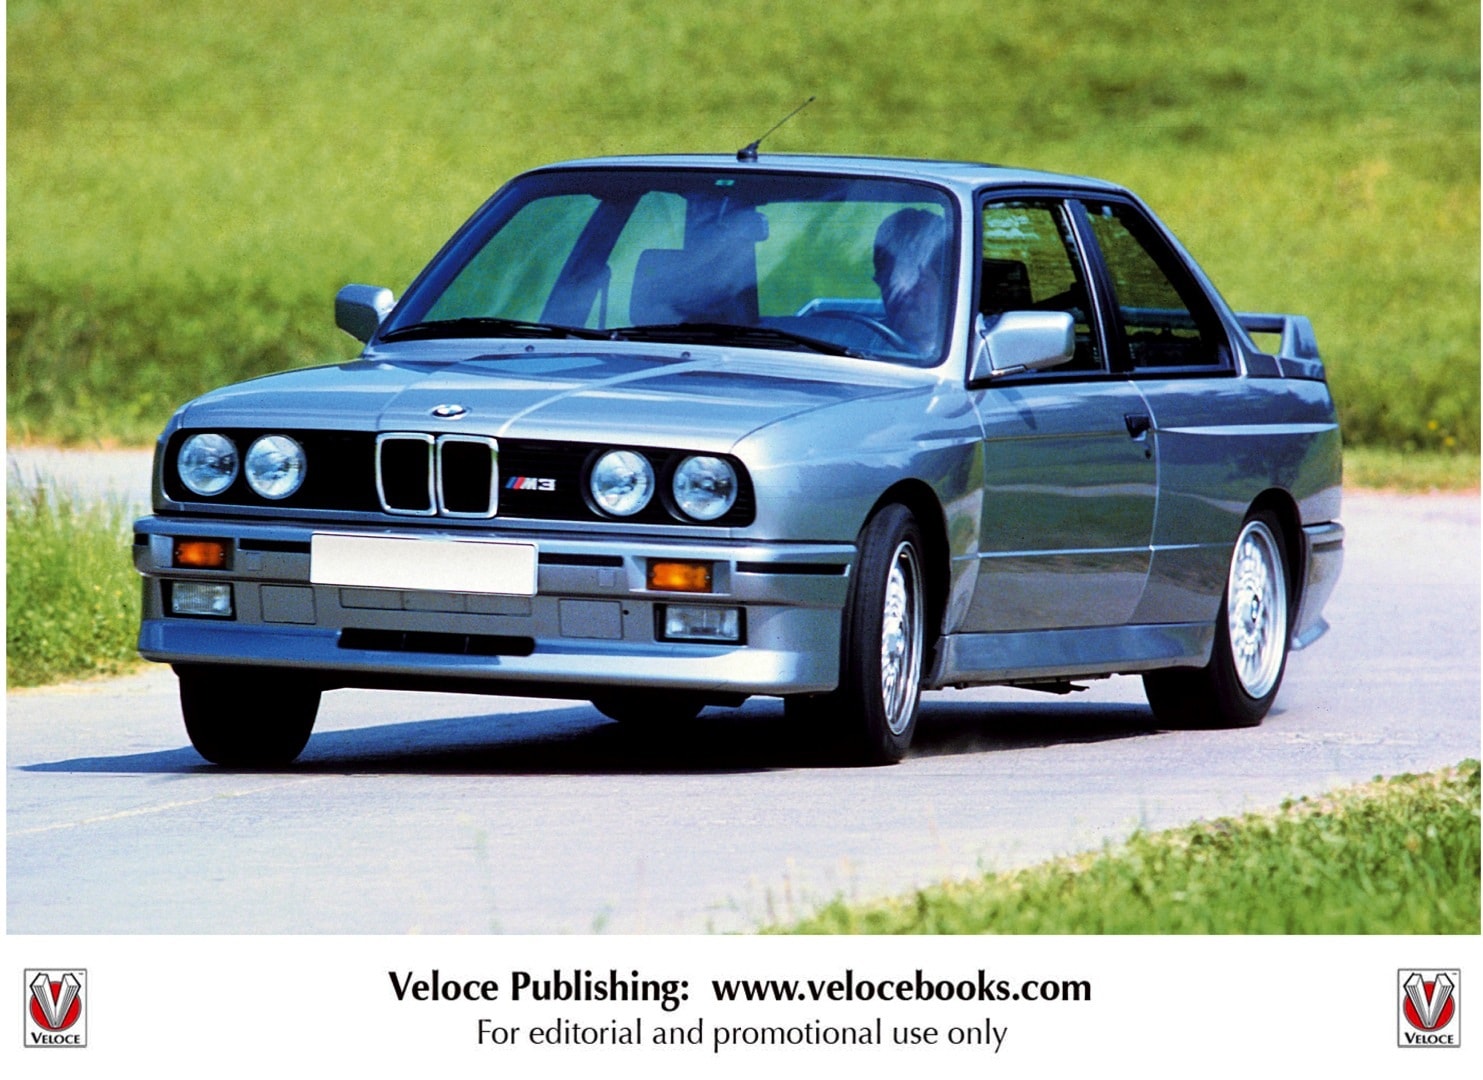 'How to Modify Your BMW E30 3 Series' Book Launched in the ...